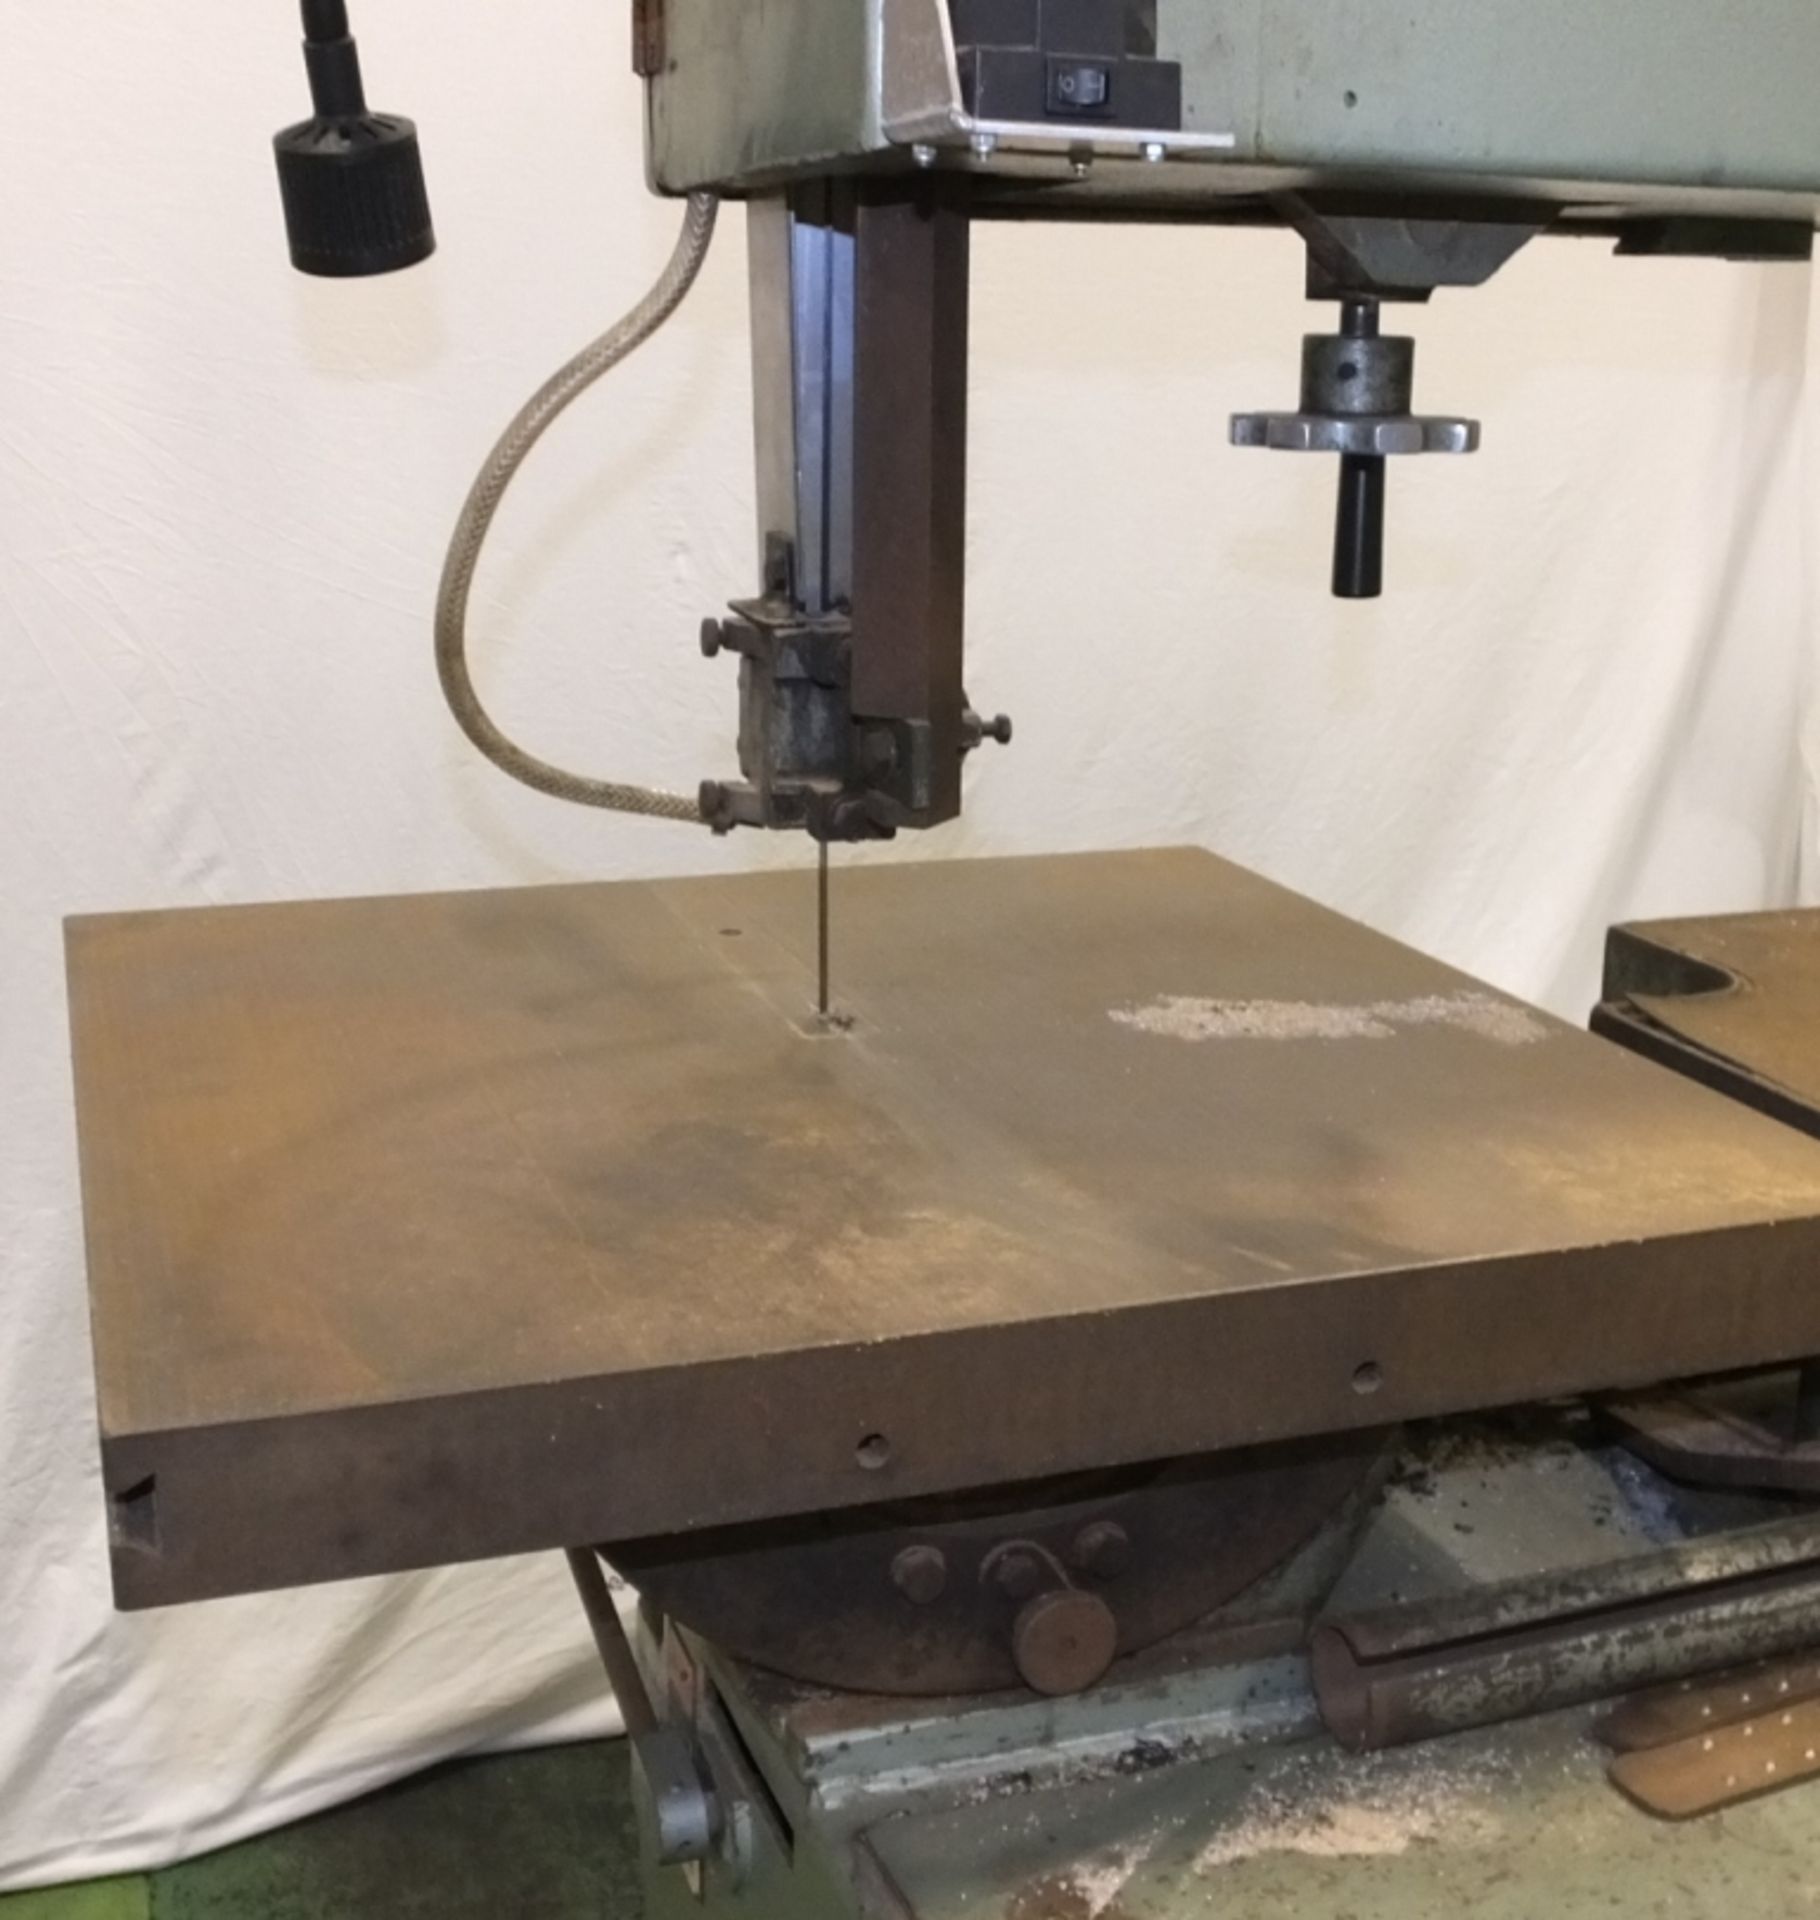 Hartle Midsaw "Minor Deepthroat" Tool Room Bandsaw - £20 Loading Charge Applied to this lo - Image 2 of 10